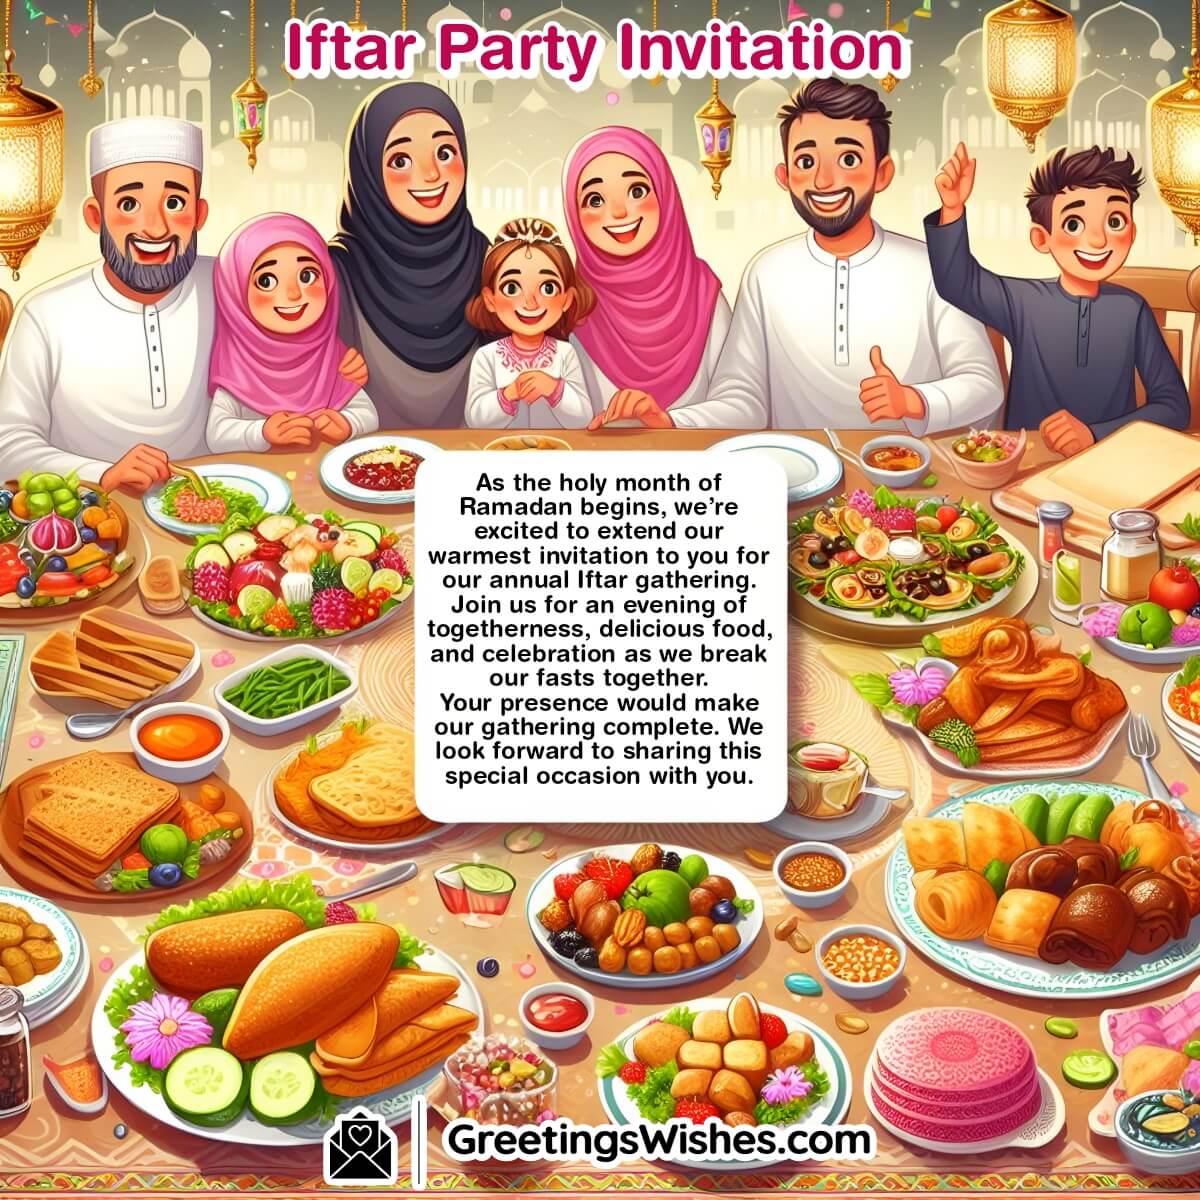 Iftar Party Invitation For Relatives And Friends